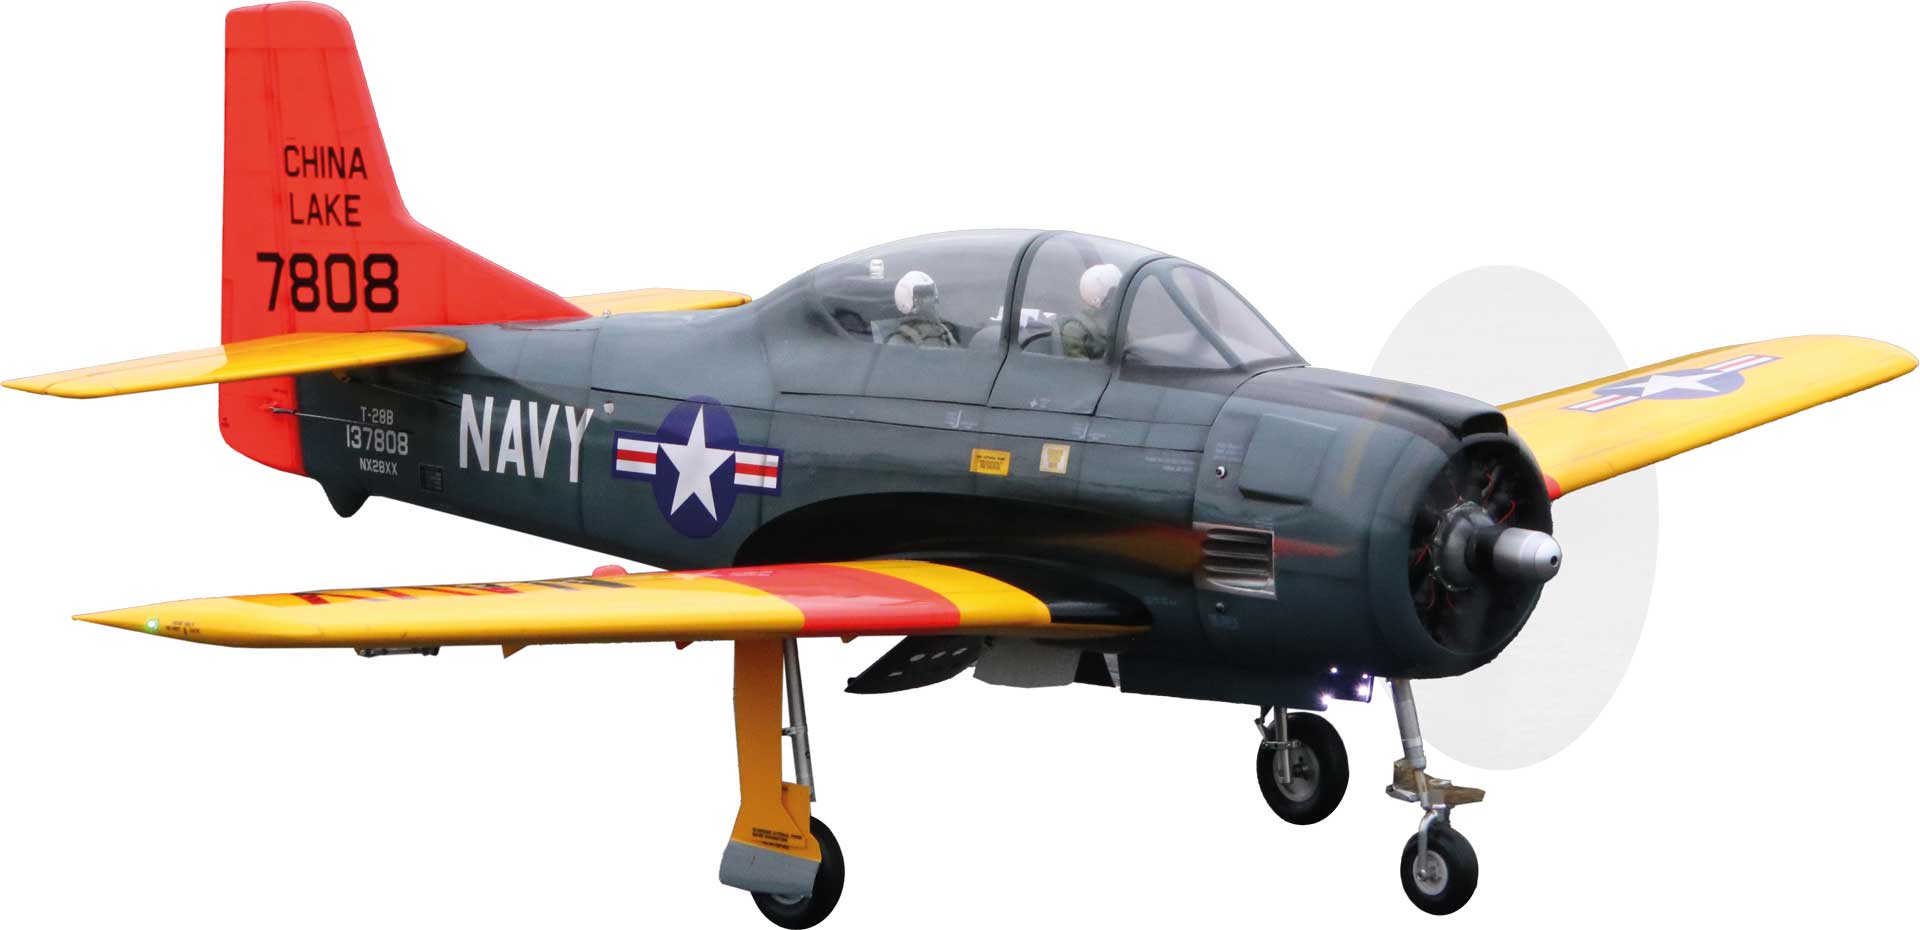 Seagull Models ( SG-Models ) T-28 Trojan 82.5" ARF Warbird Gray/Yellow without retractable undercarriage "China Lake"